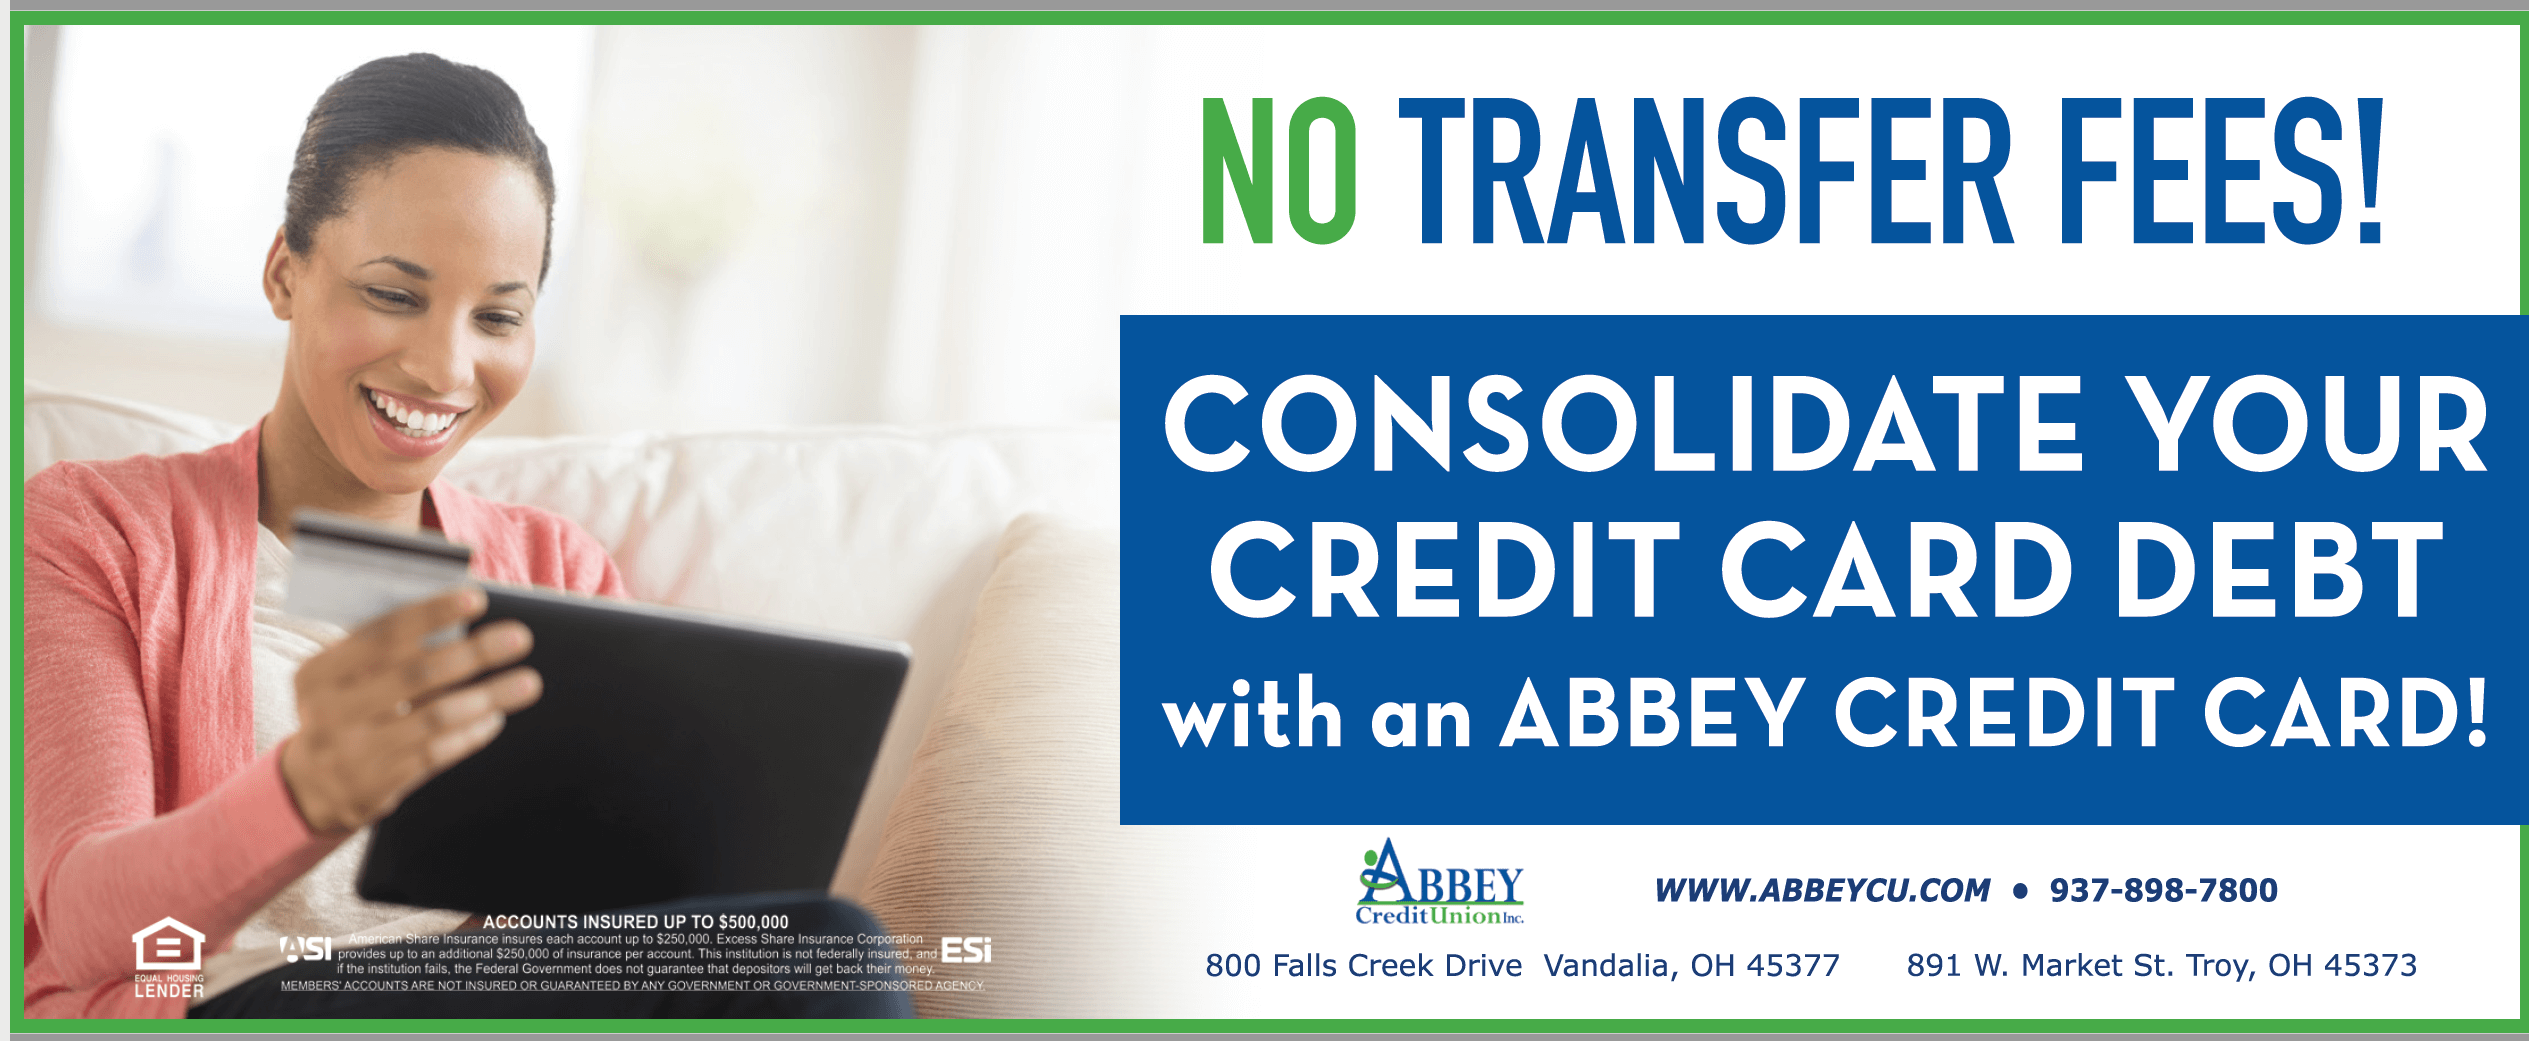 No Transfer Fees! Consolicate your Credit Card Deby with an Abbey Credit Card!